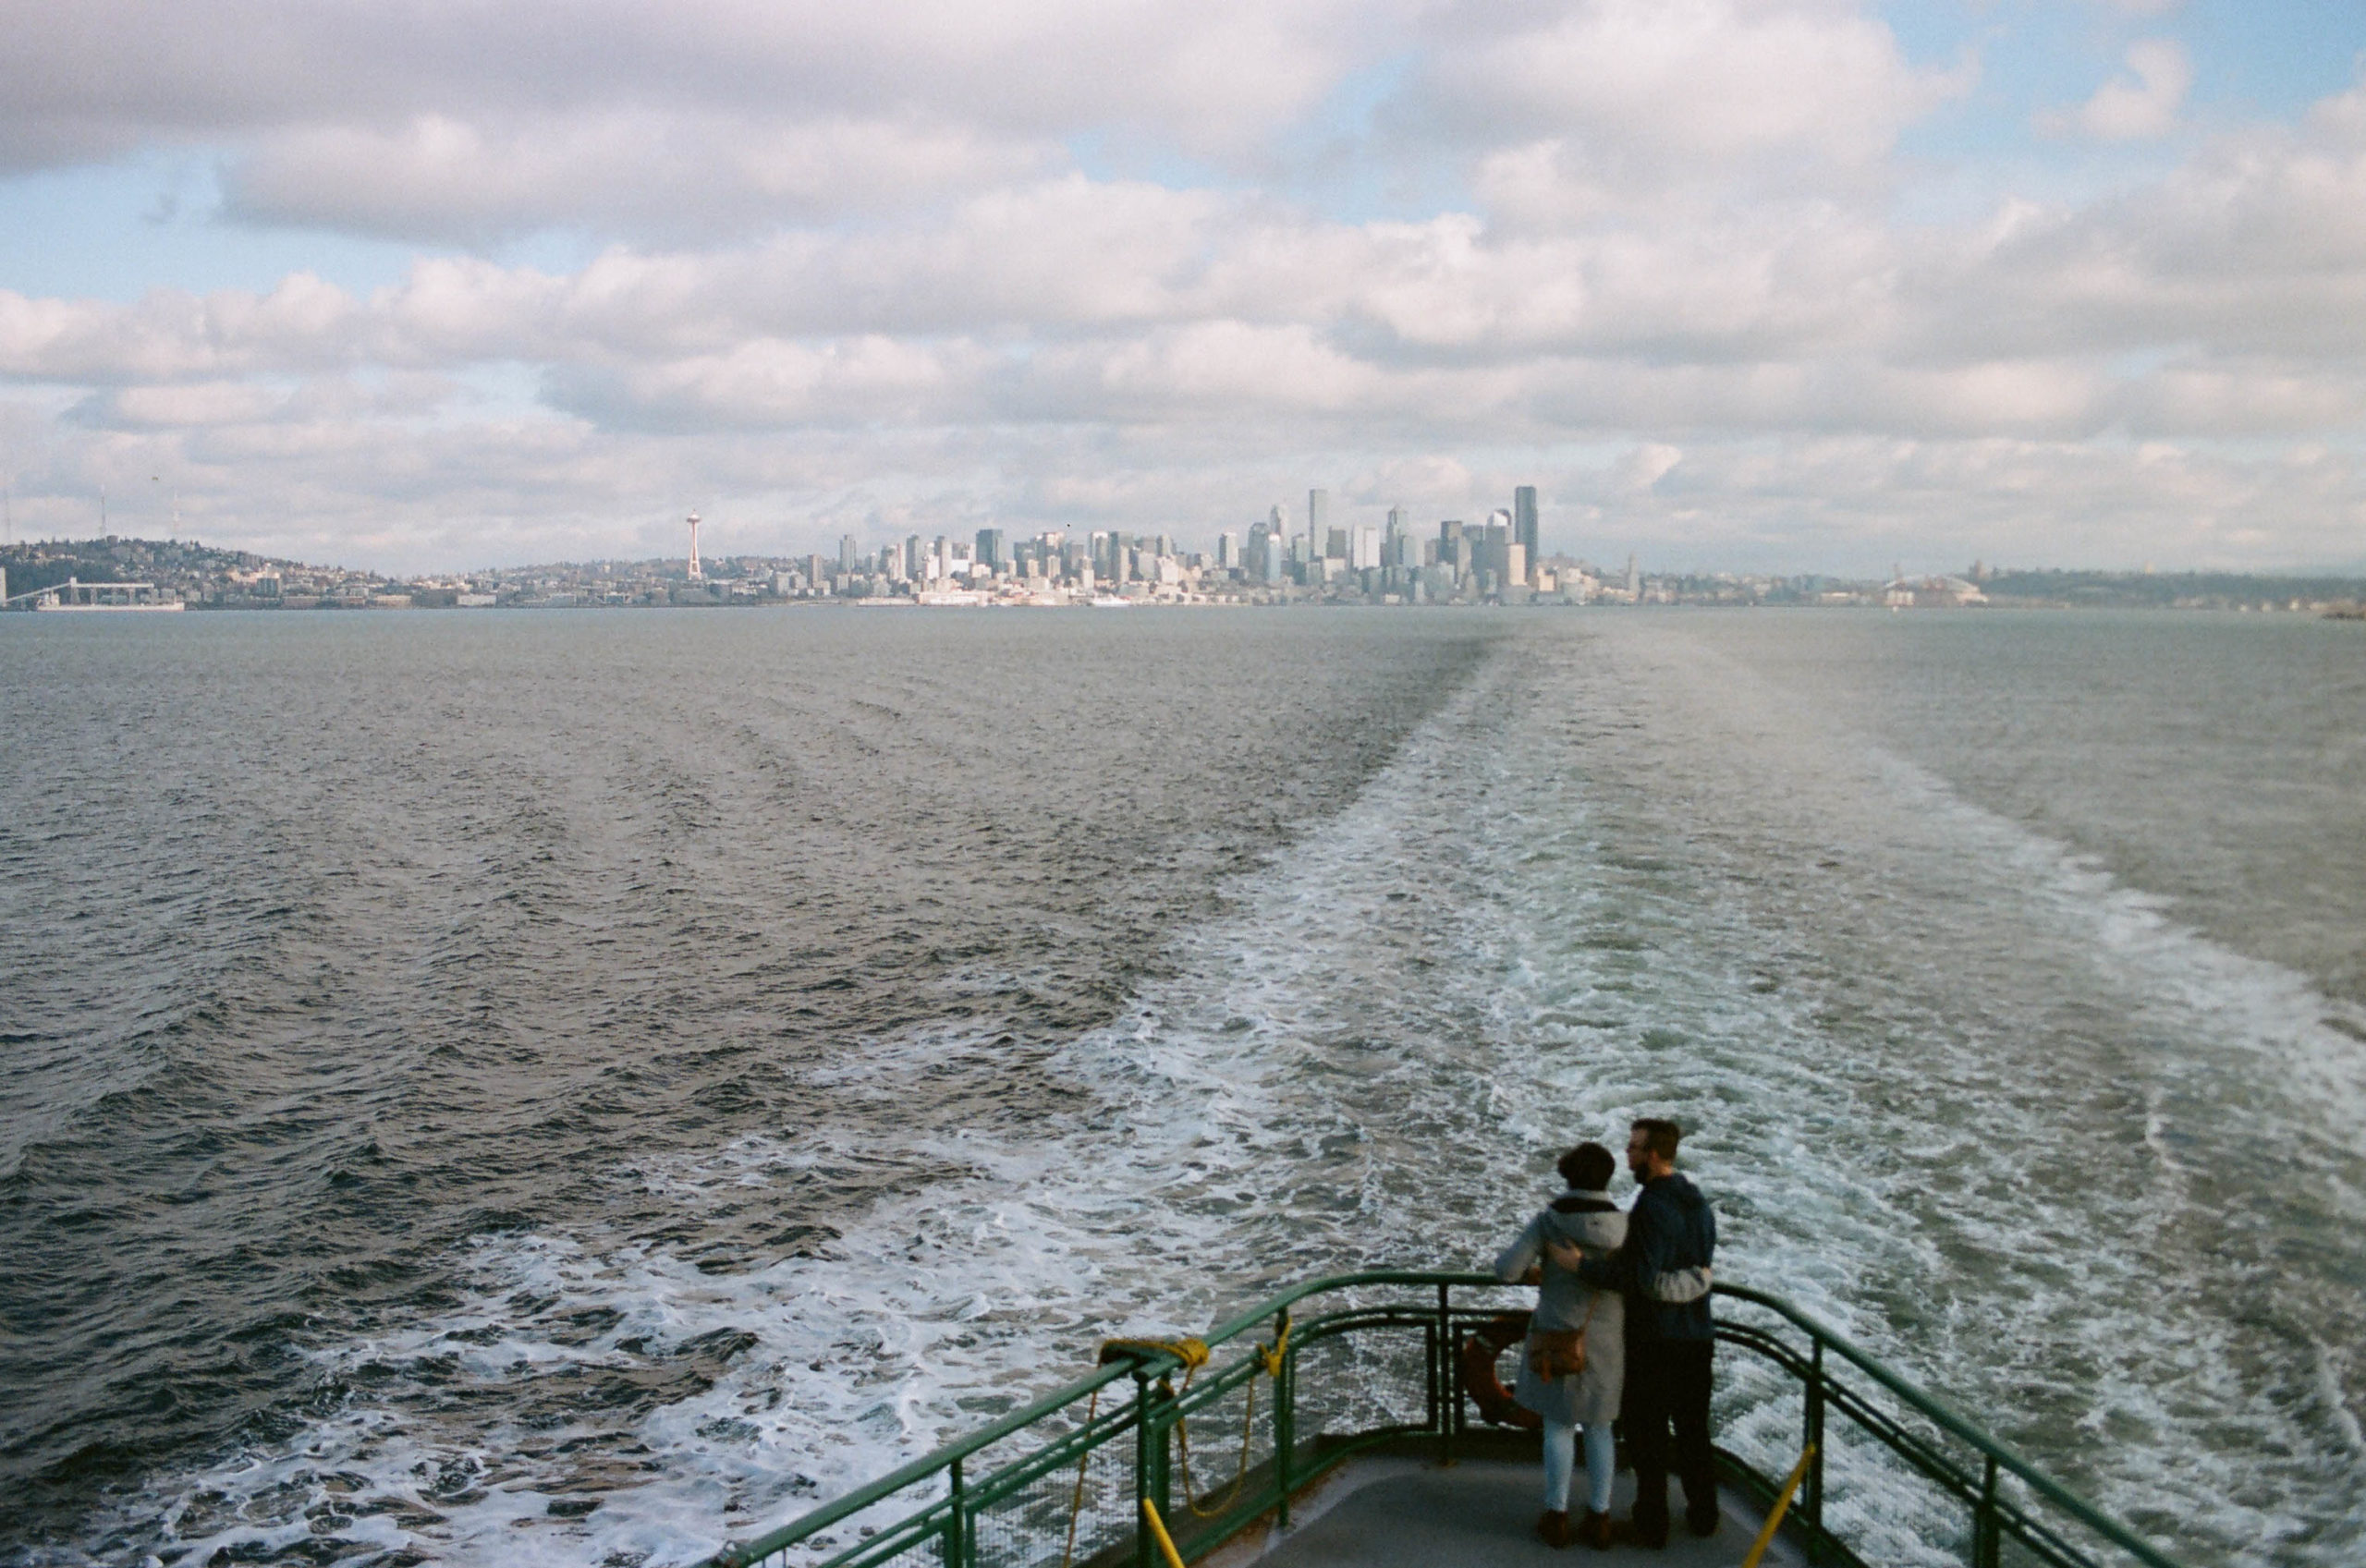 A couple embracing on the deck of the Washington Ferry with the Seattle skyline in the background, under a partly cloudy sky.